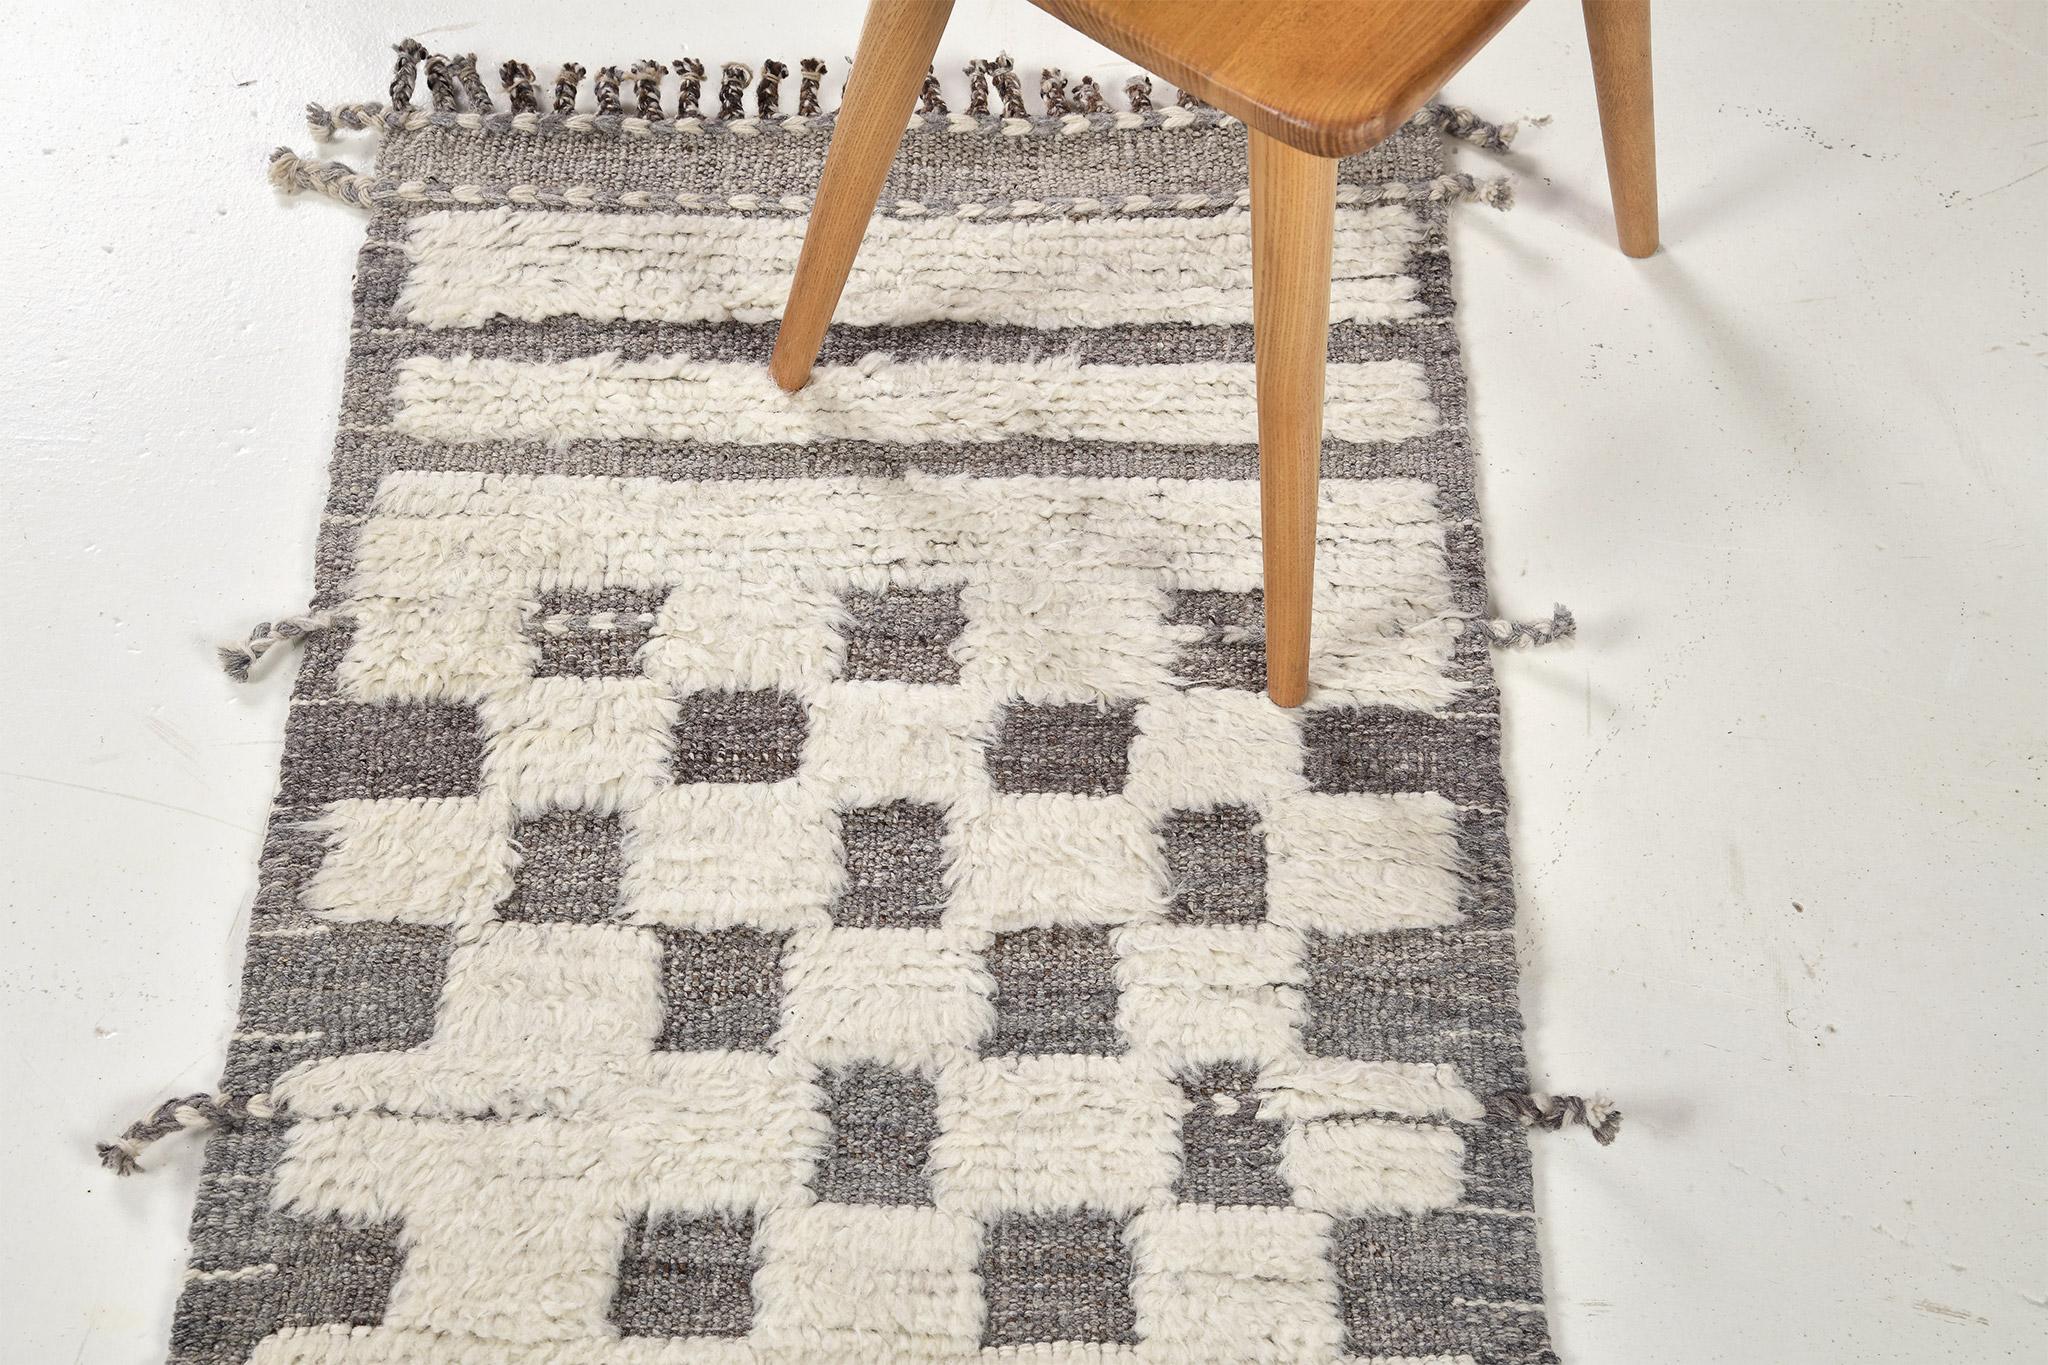 Sirocco' is a stunning hand woven gray rug with embossed detailing in a checkered pattern atop a natural ivory pile weave. Beautiful tassels and bordered designs add a timely and one of a kind essence for the modern design world. Haute Bohemian